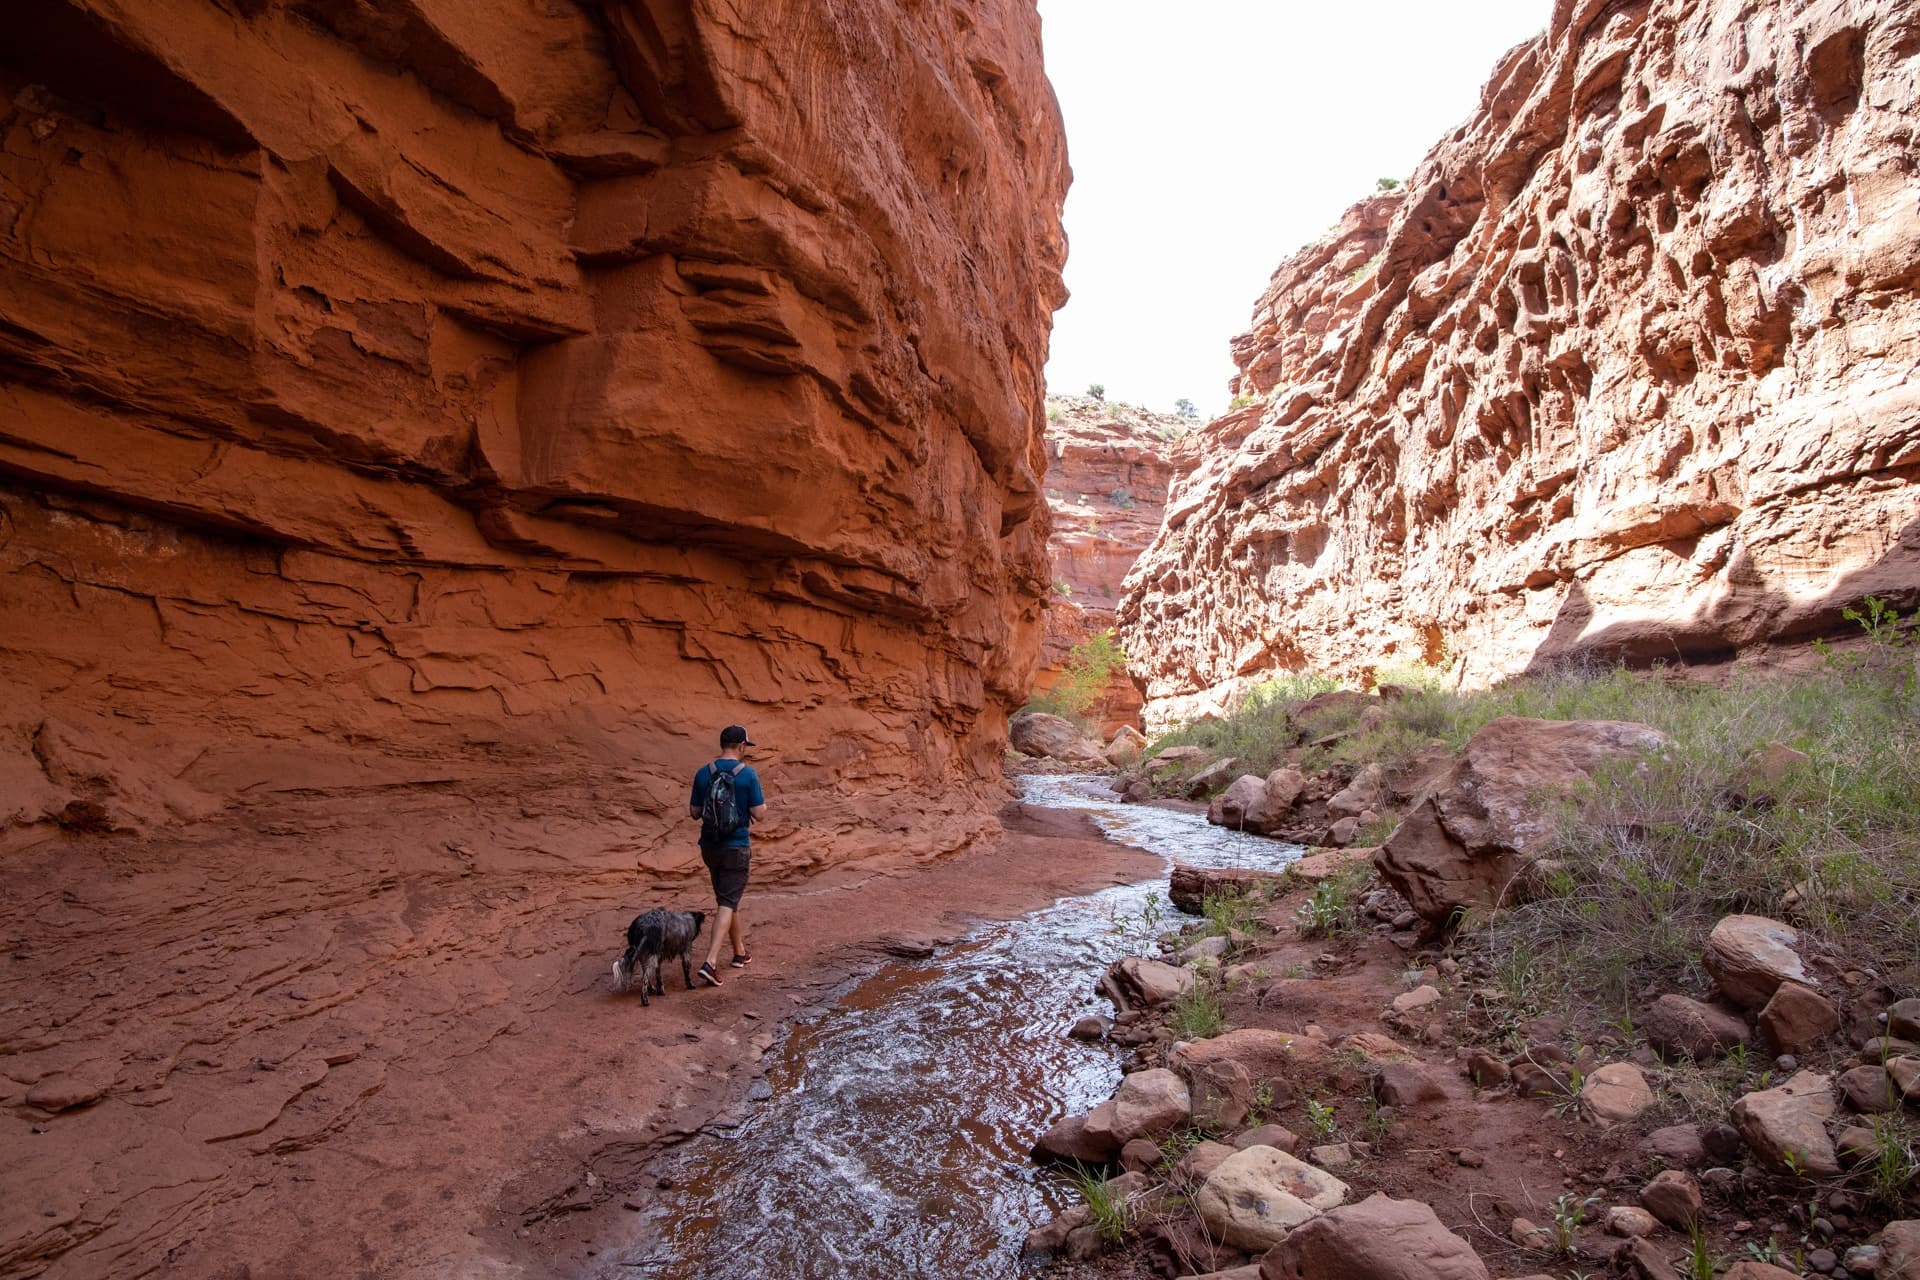 Person hiking on trail through red rock canyon in Moab with small stream running through it